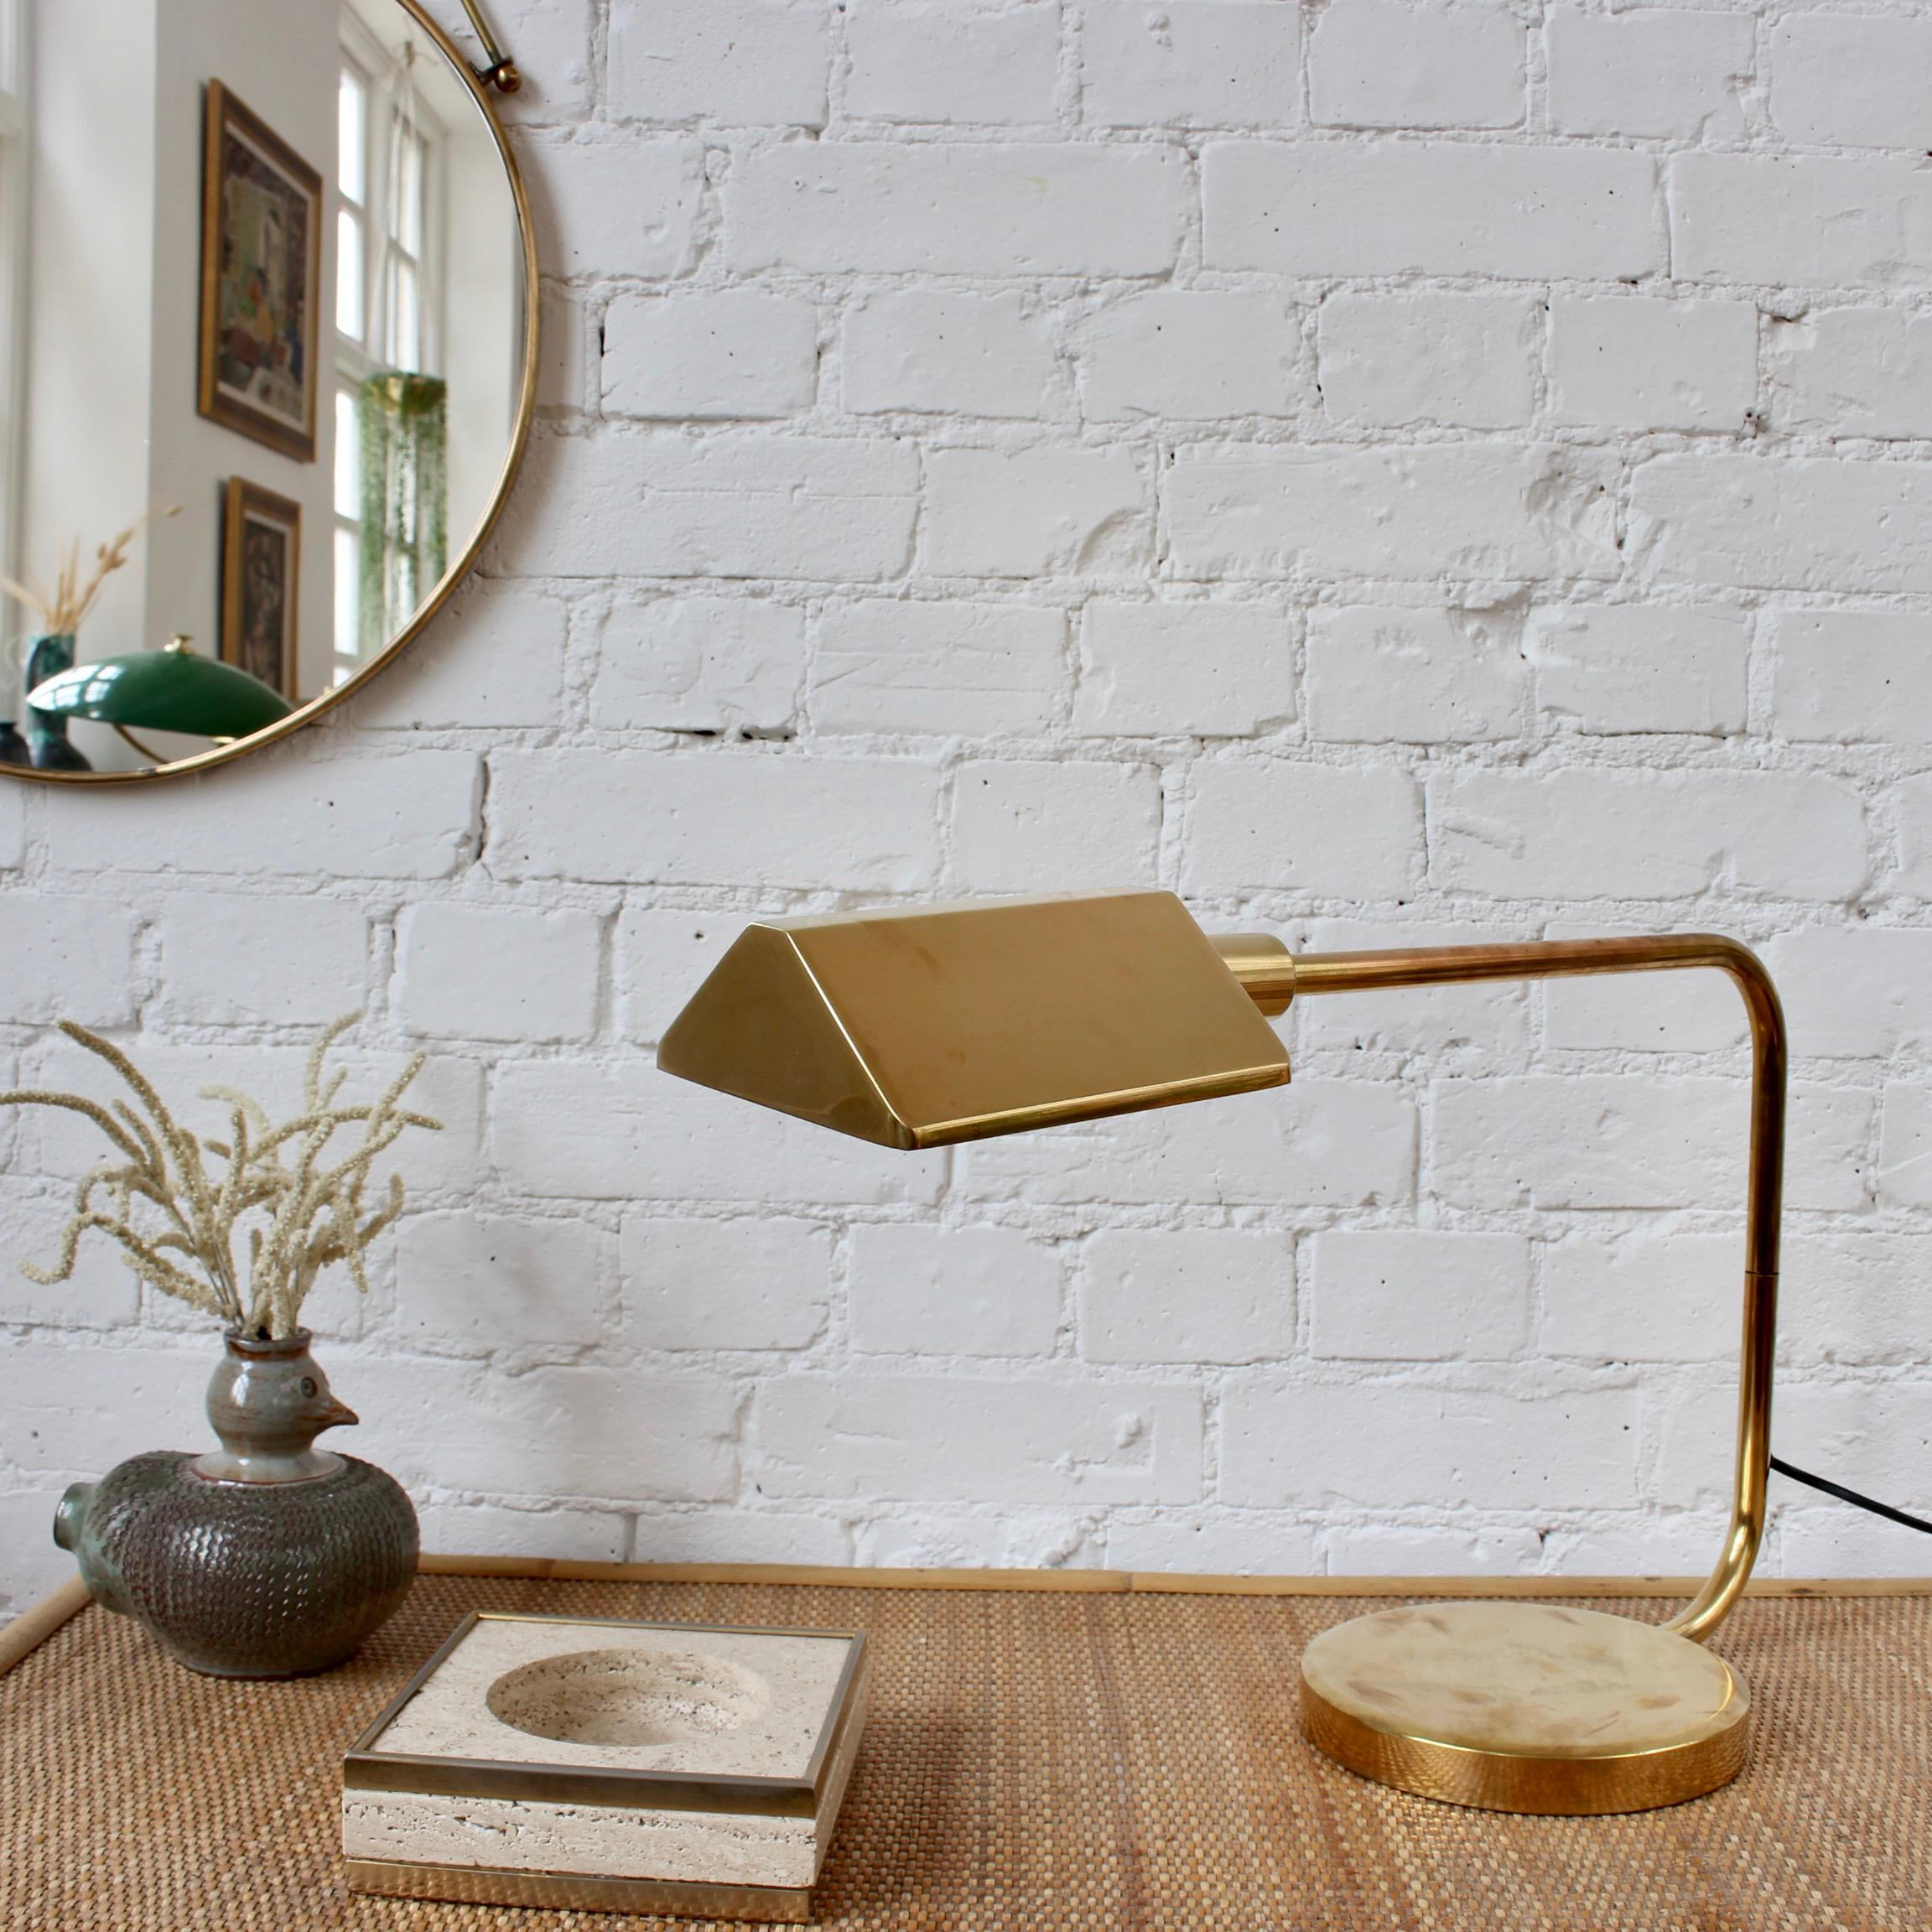 Italian vintage brass table lamp (circa 1950s). A timeless desk lamp with delightful mid-century detail including an angled arm extending from the very weighty base. The brass features a characterful aged patina throughout adding warmth to any room.